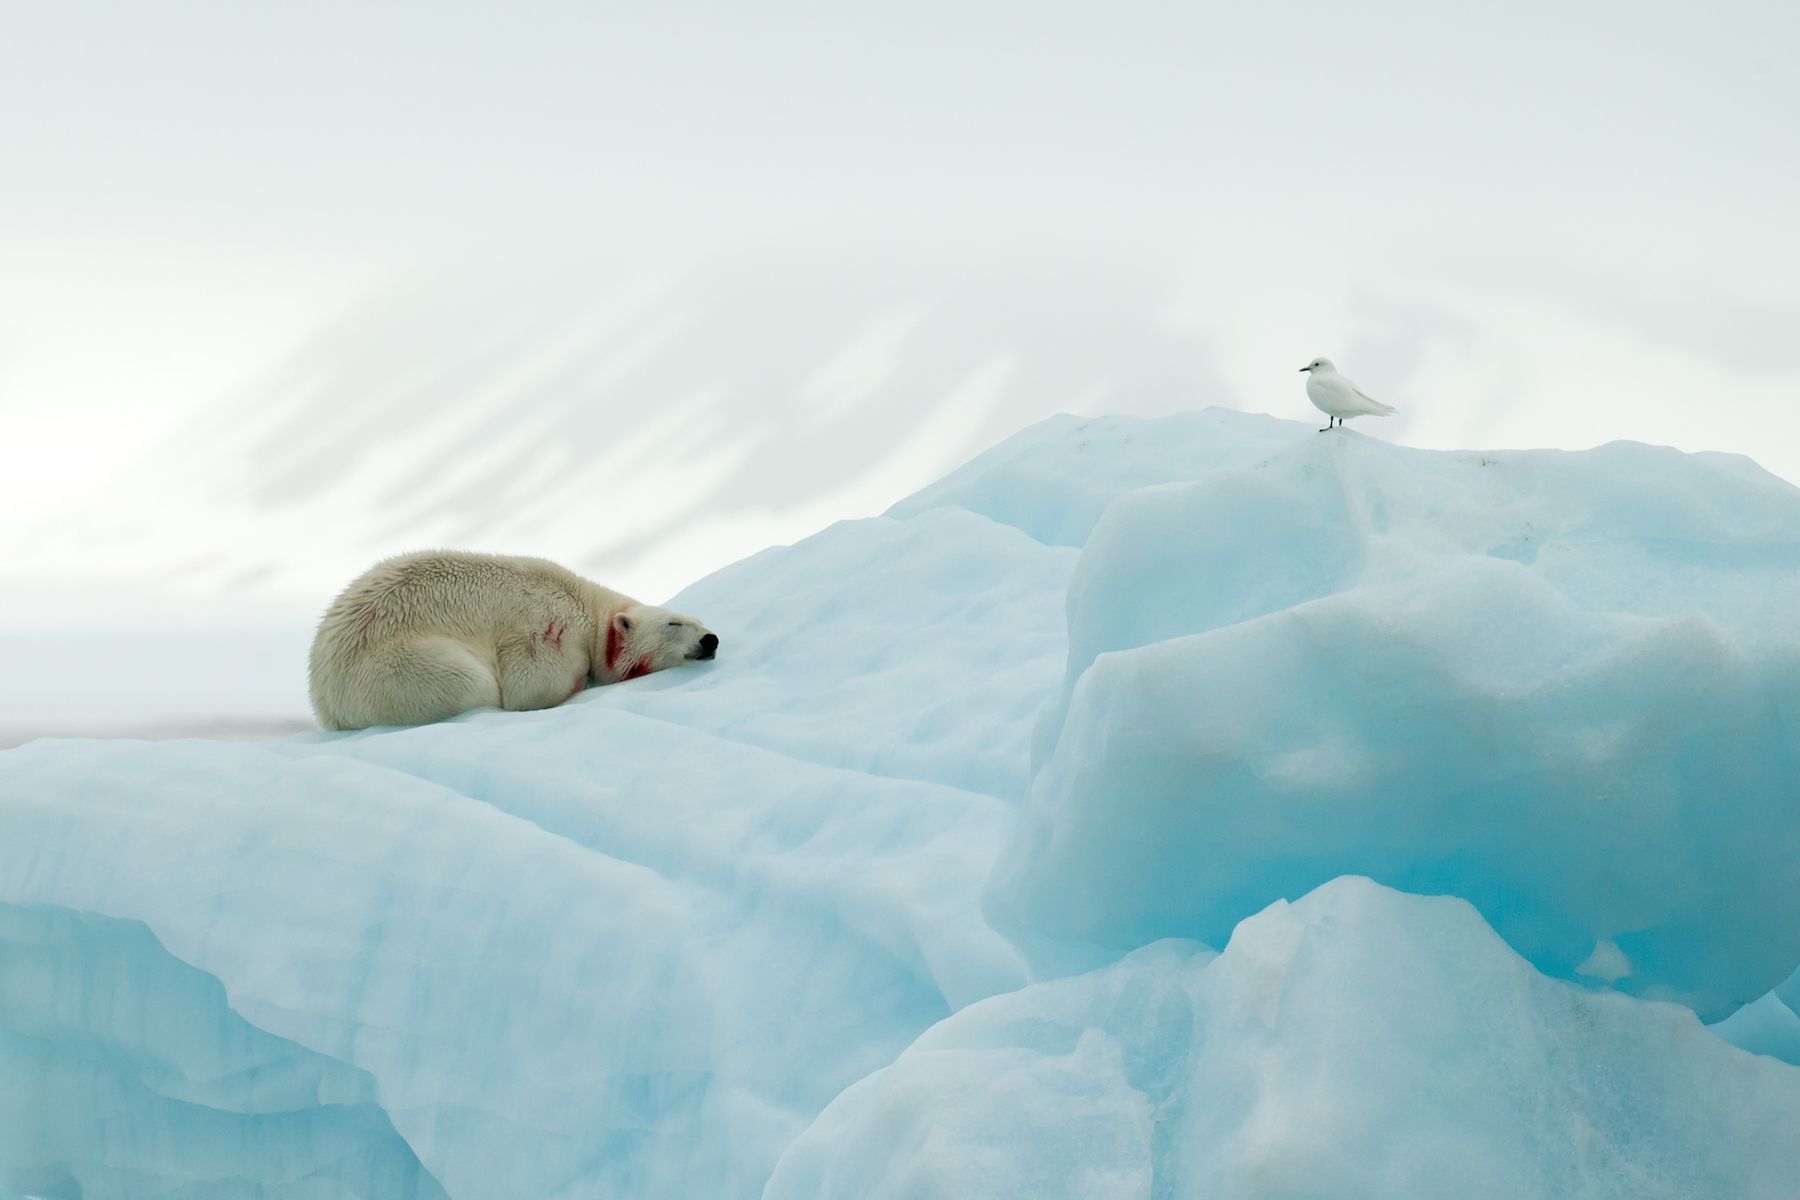 A Polar Bear rests on the ice after a meal, watched by an Ivory Gull, on a Wild Images Spitsbergen (Svalbard) photography tour